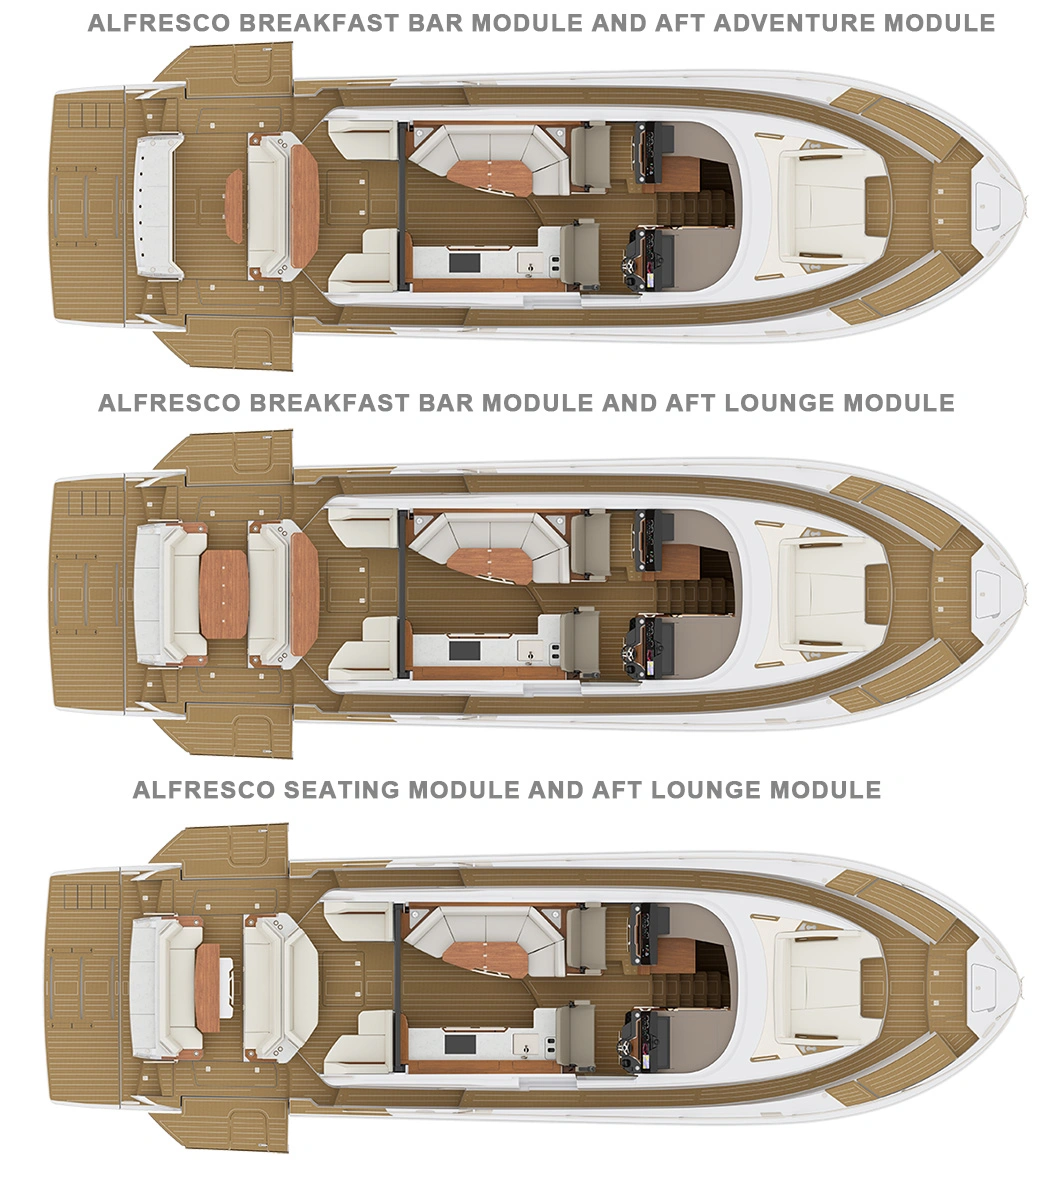 14m Fiberglass Yacht Double Deck for The Ultimate Yachting Experience with Outboard Engine